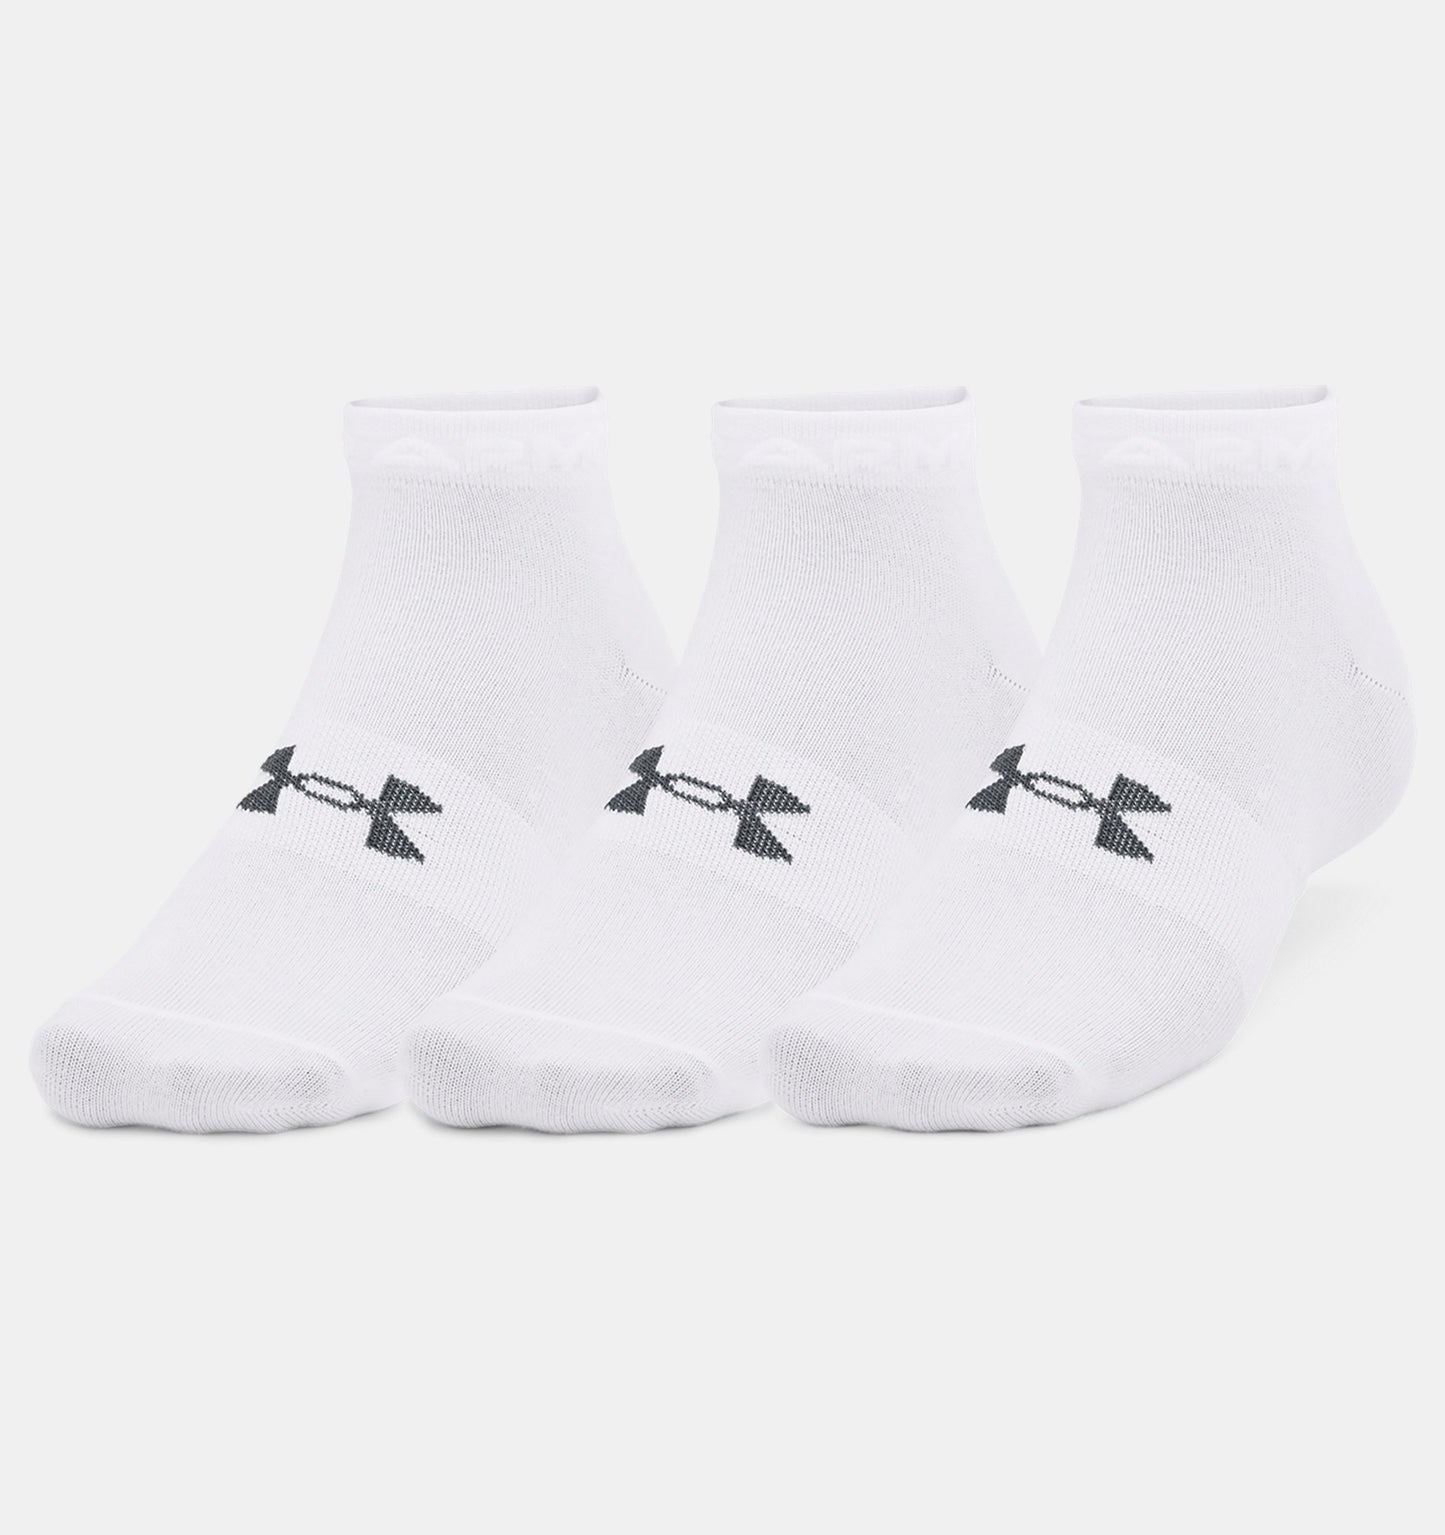 UAA-Y10 (Under armour unisex essentials low cut 3 pack white/pitch gray) 102391304